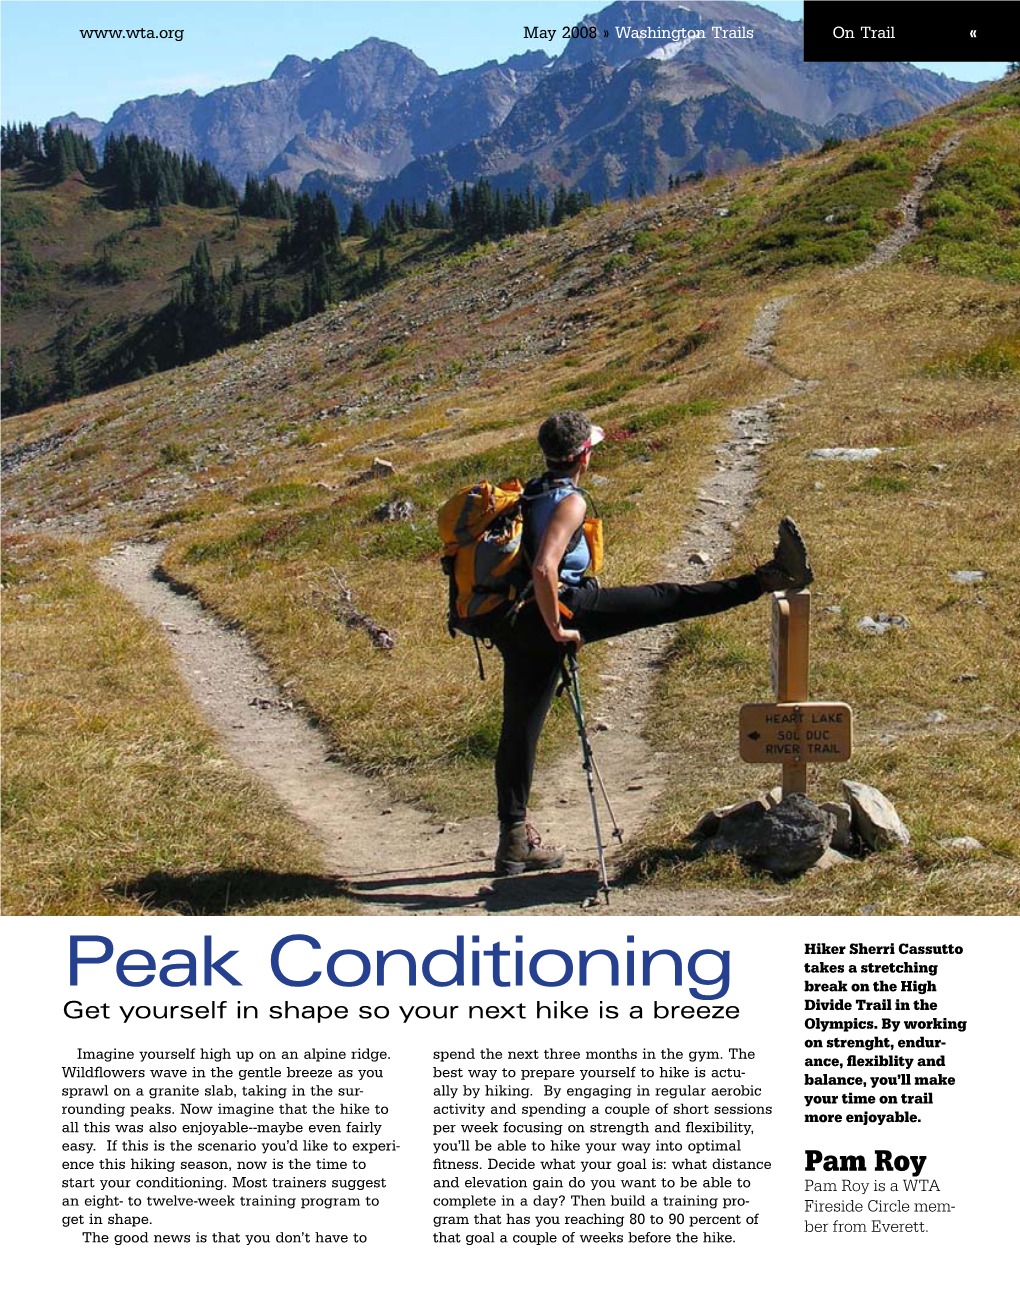 Peak Conditioning Break on the High Get Yourself in Shape So Your Next Hike Is a Breeze Divide Trail in the Olympics